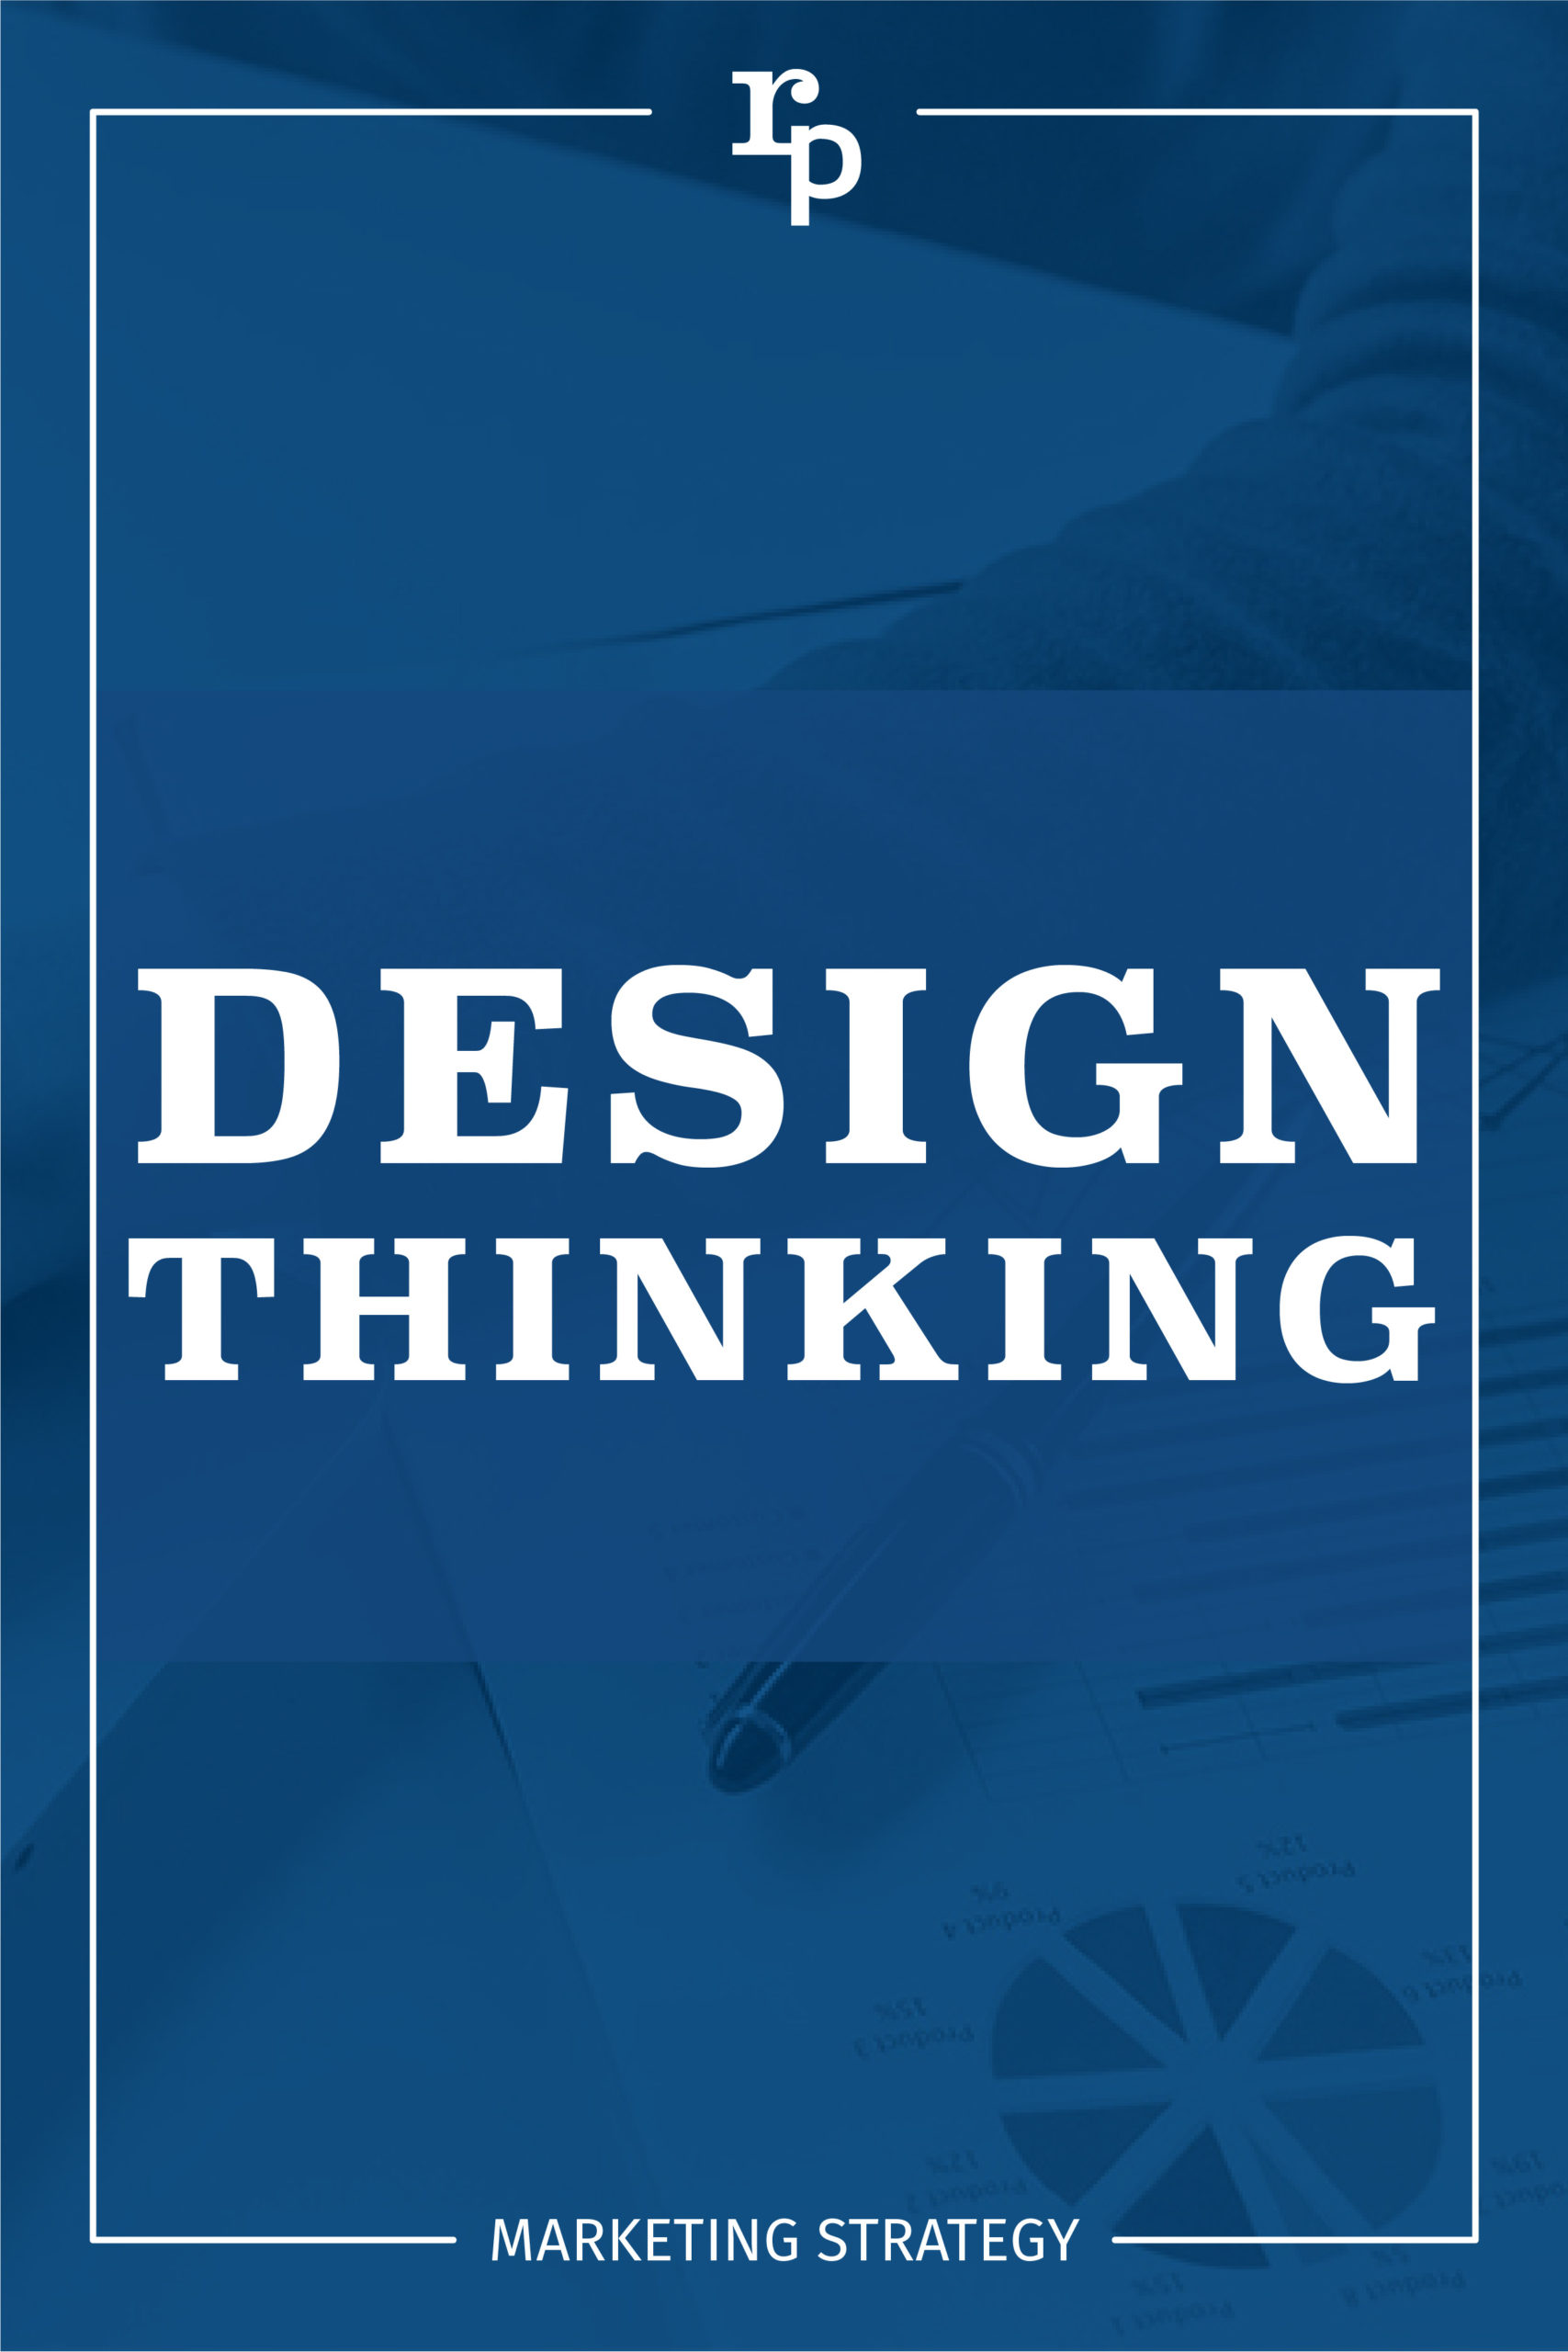 design thinking strategy1 pin blue scaled